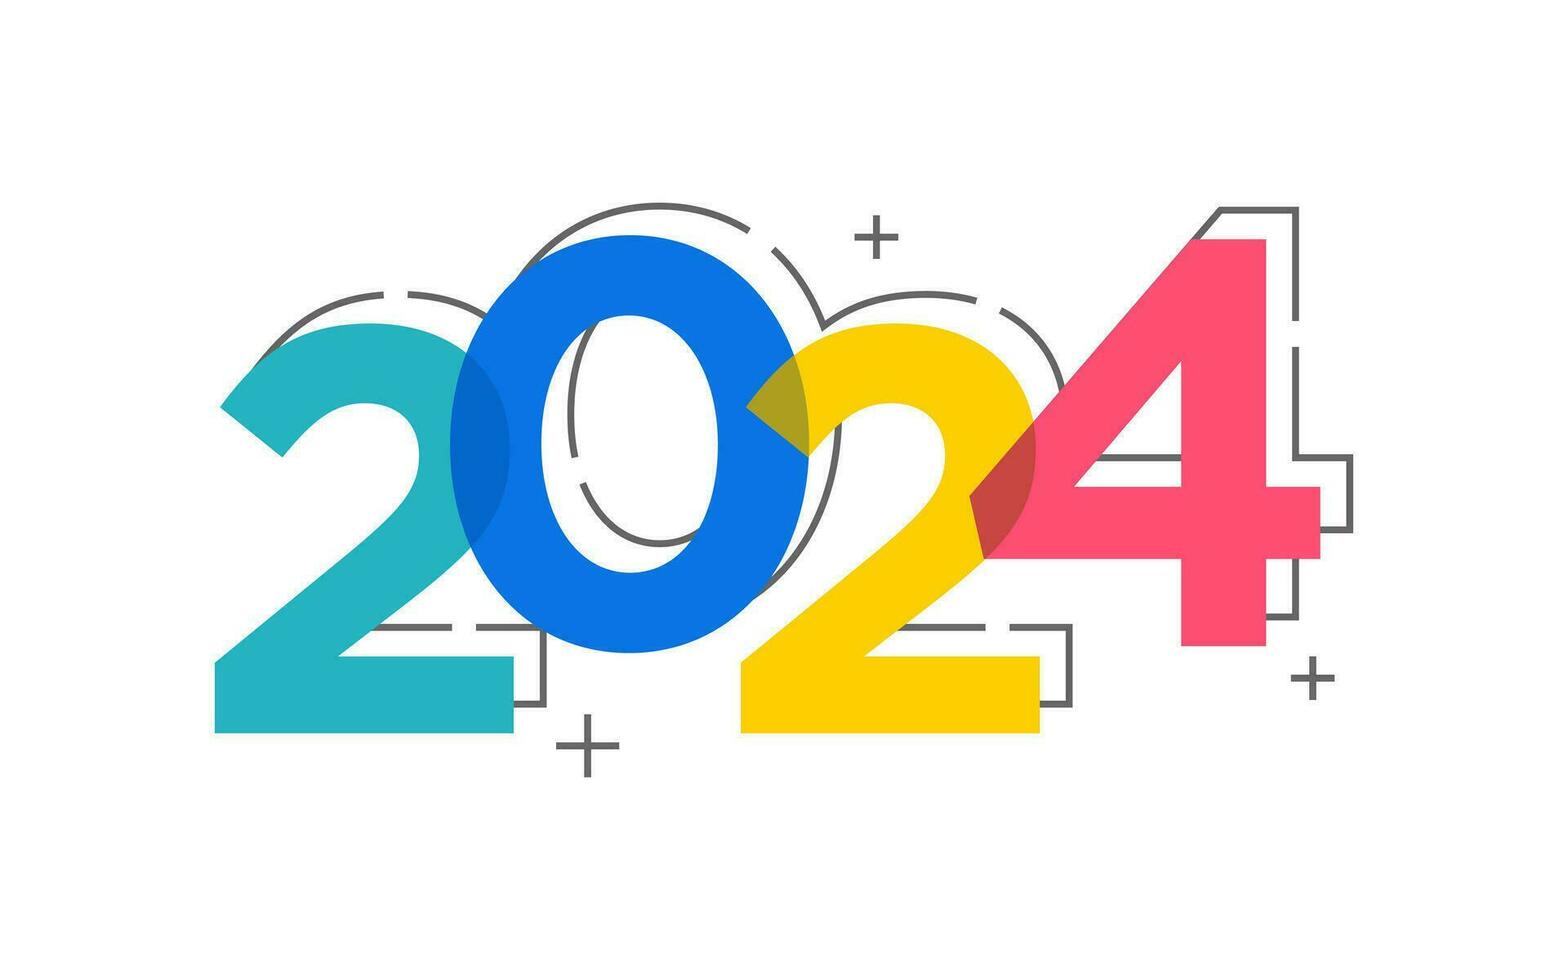 Modern vector graphic of 2024 logo happy new year, text 2024 template vector editable and resizable EPS 10